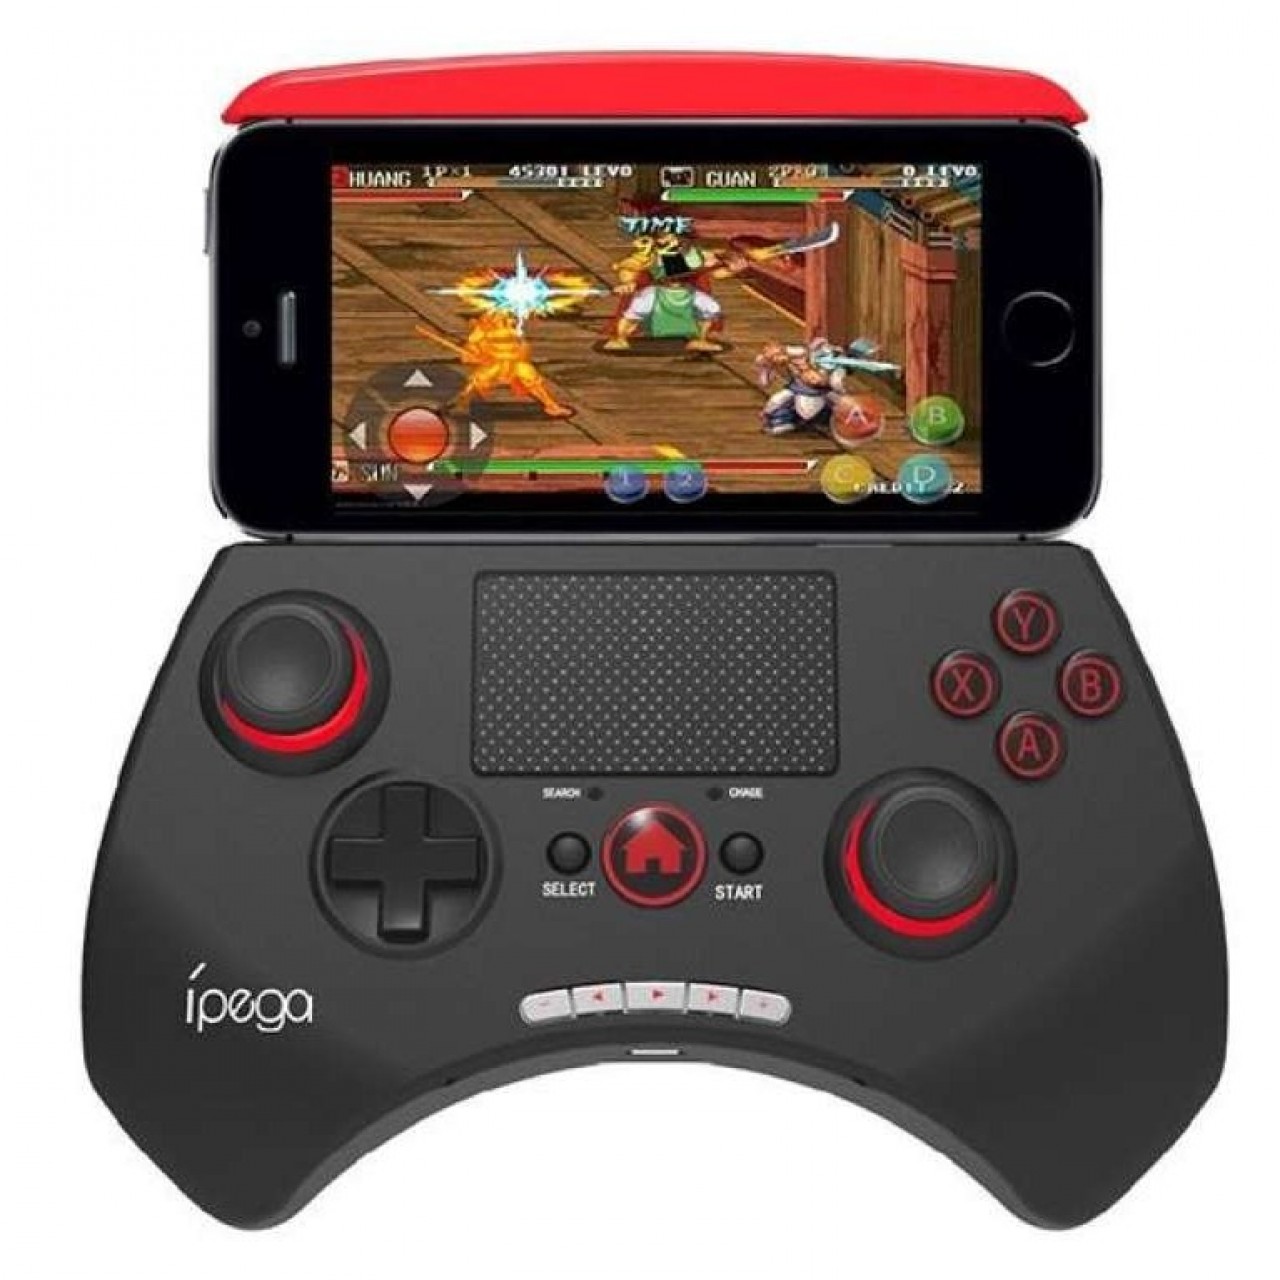 Wireless Game Pad 9028 - Bluetooth Android / IOS / PC Controller - Black